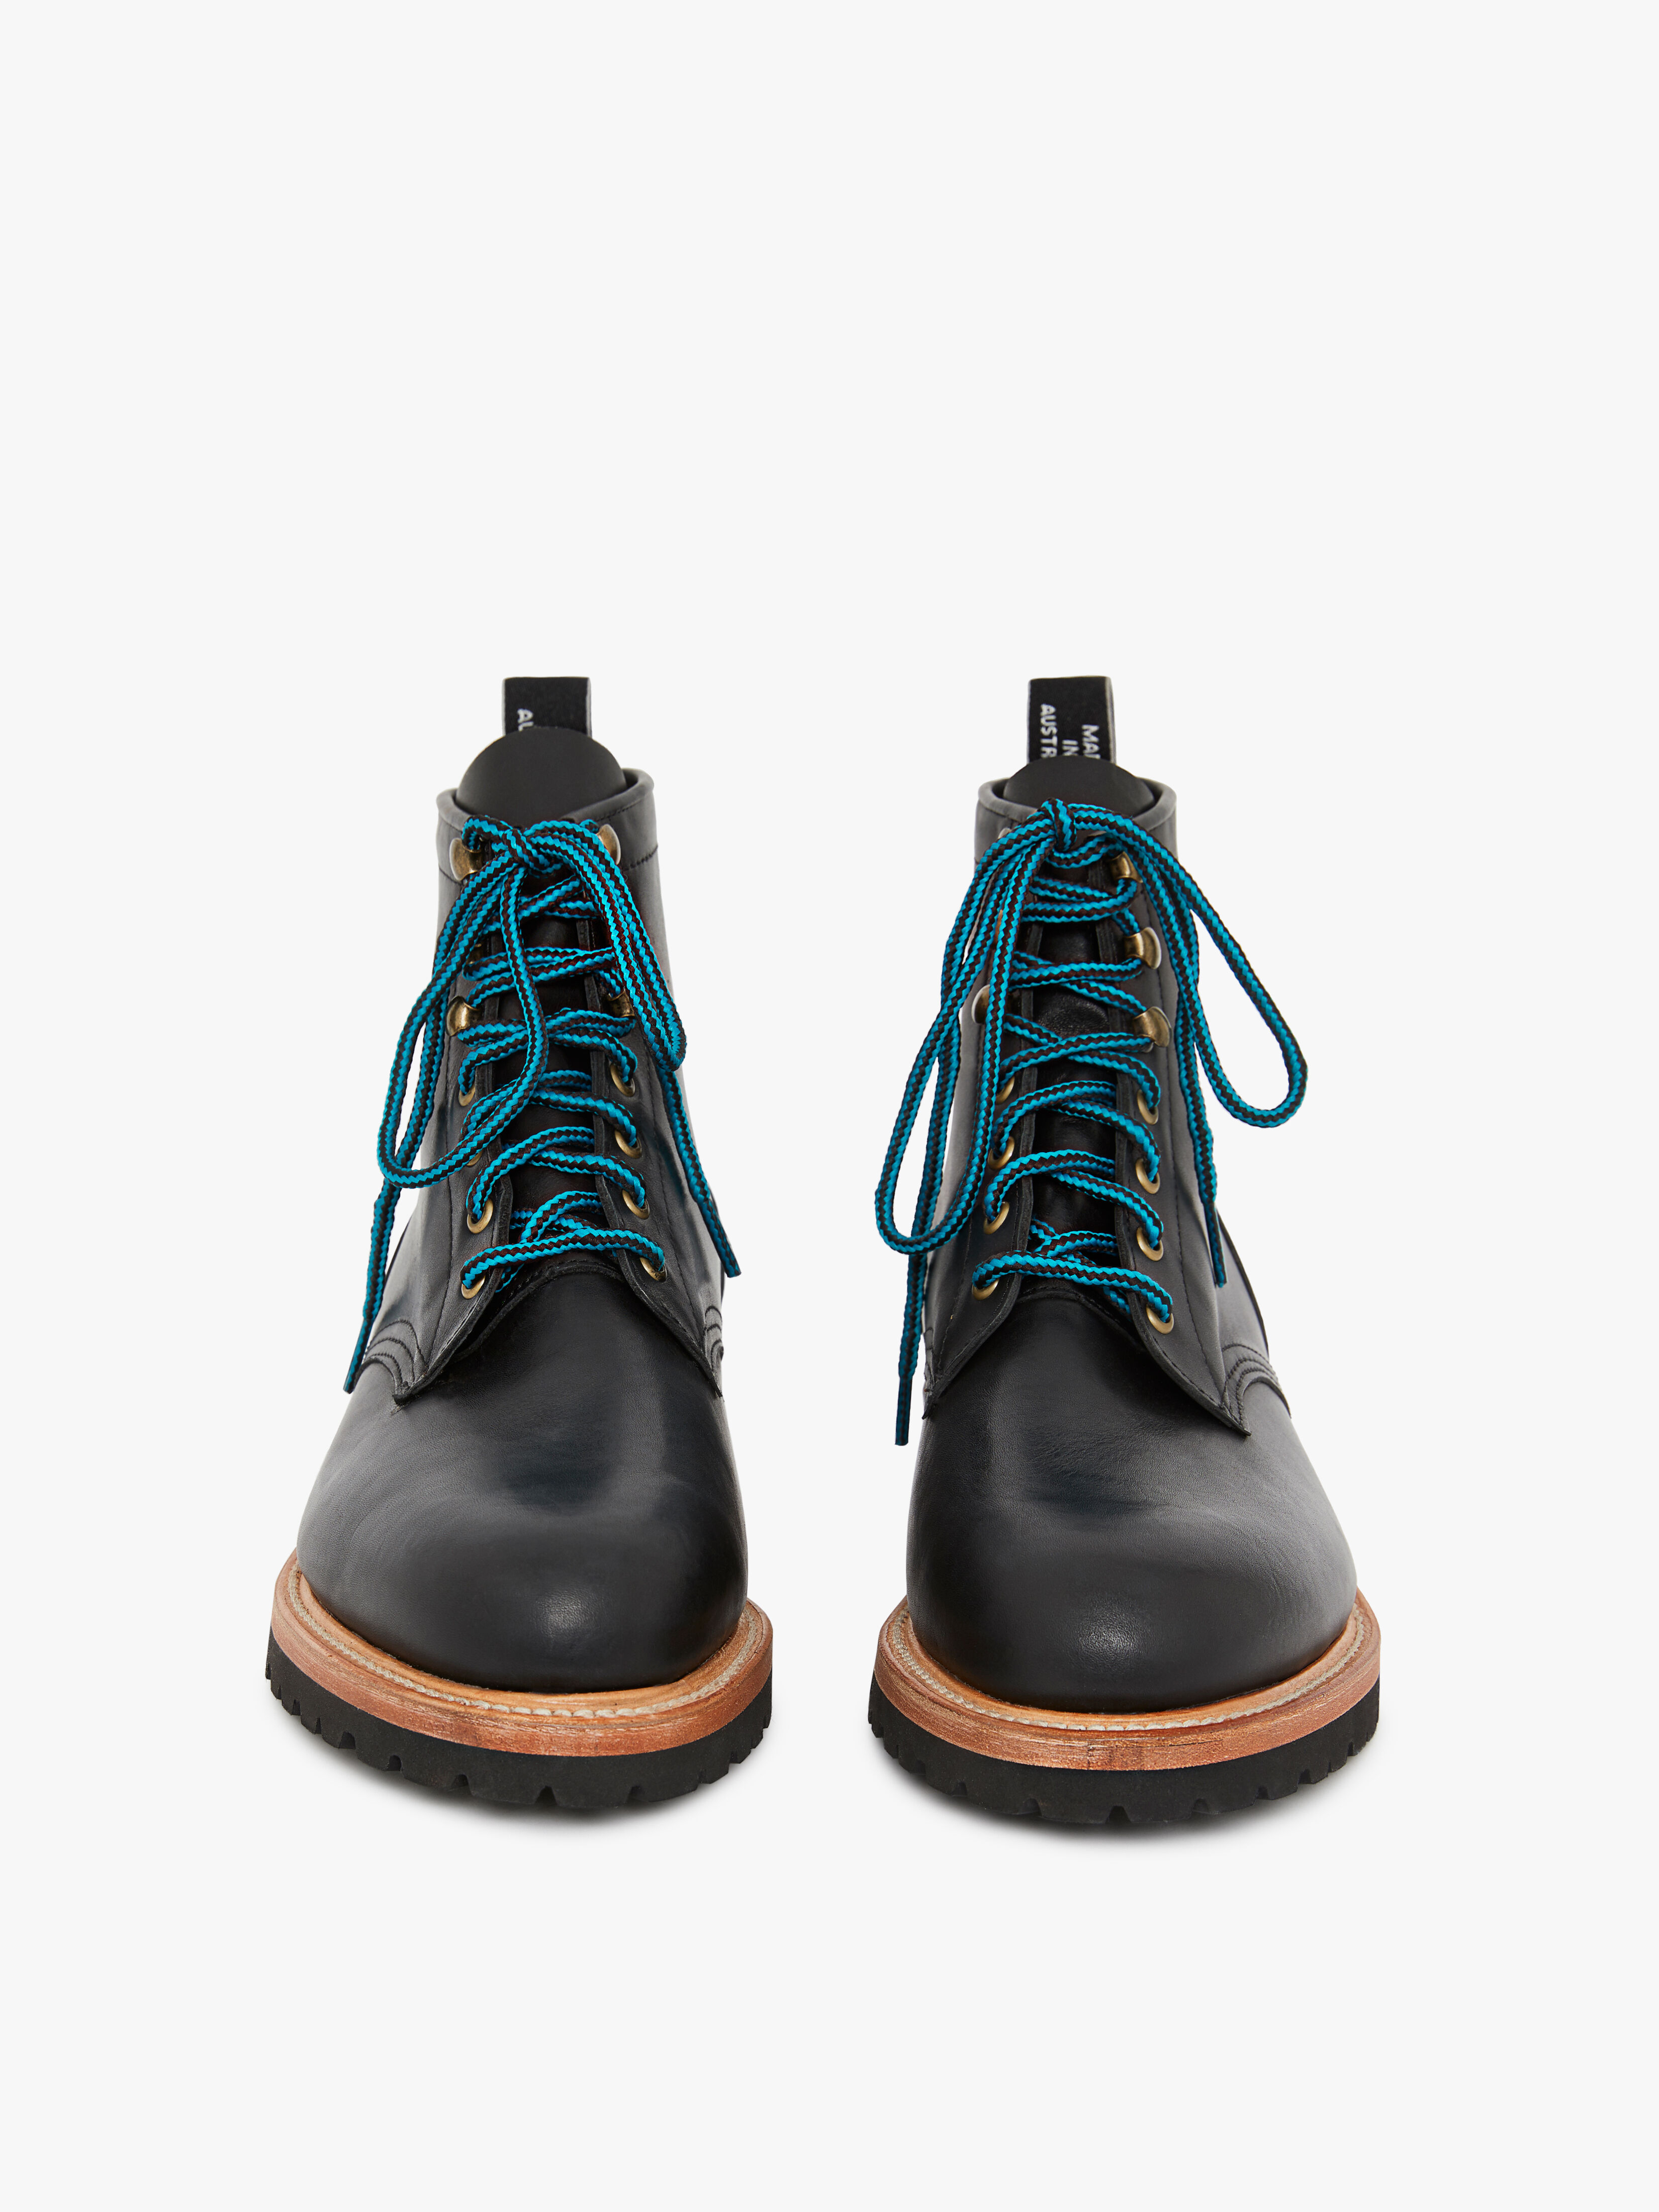 rm williams hiking boots